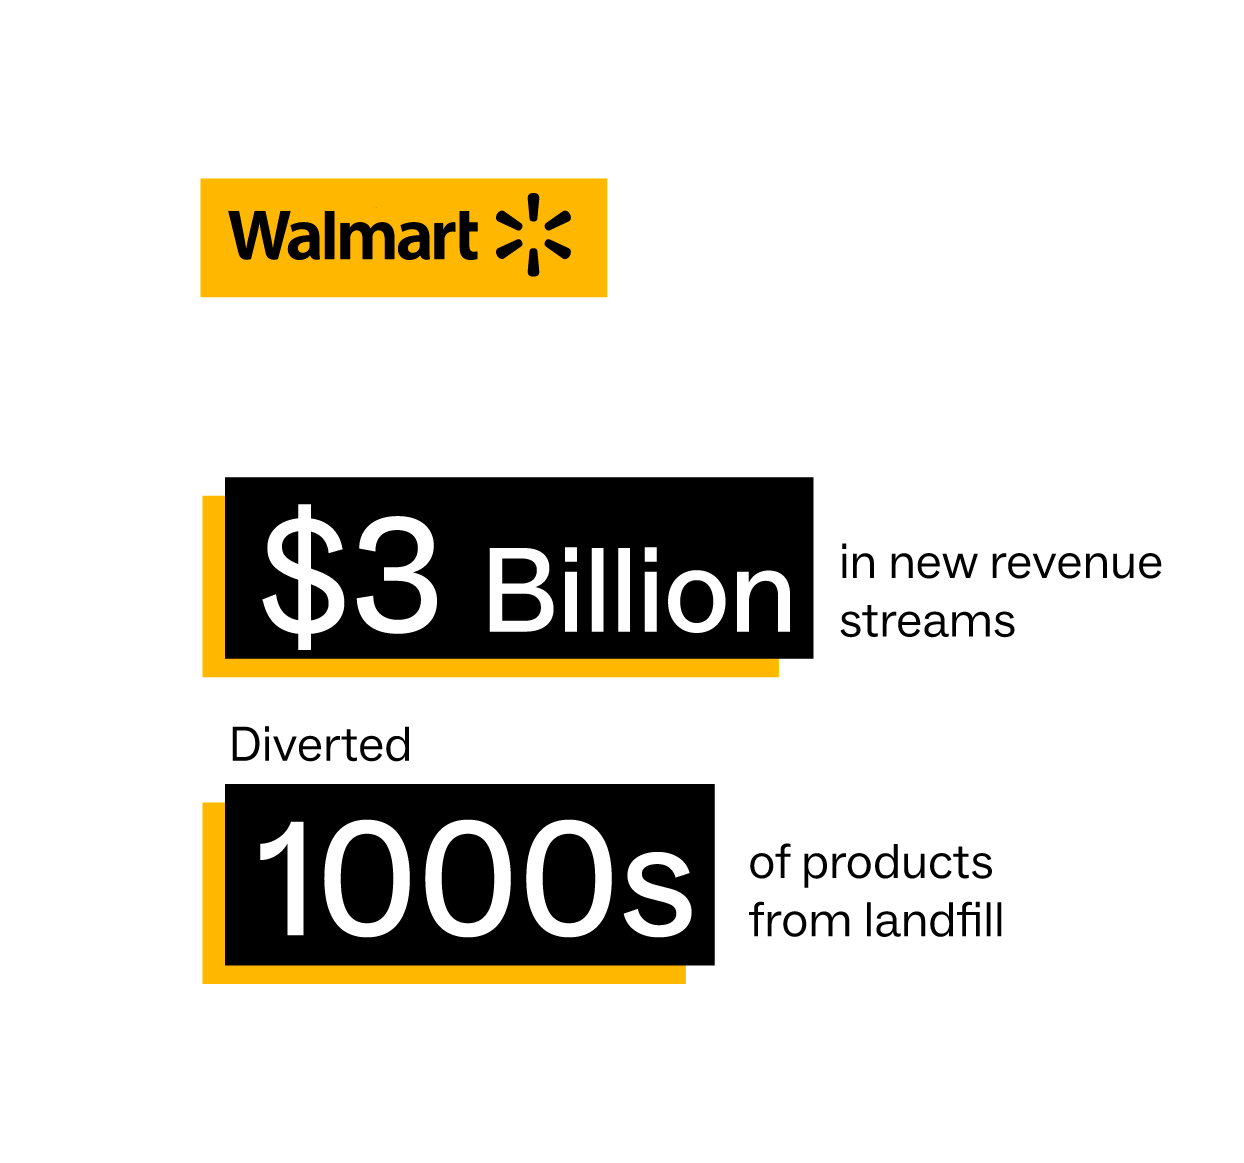 Walmart $3 Billion in new revenue streams and Diverted 1000s of products from landfill